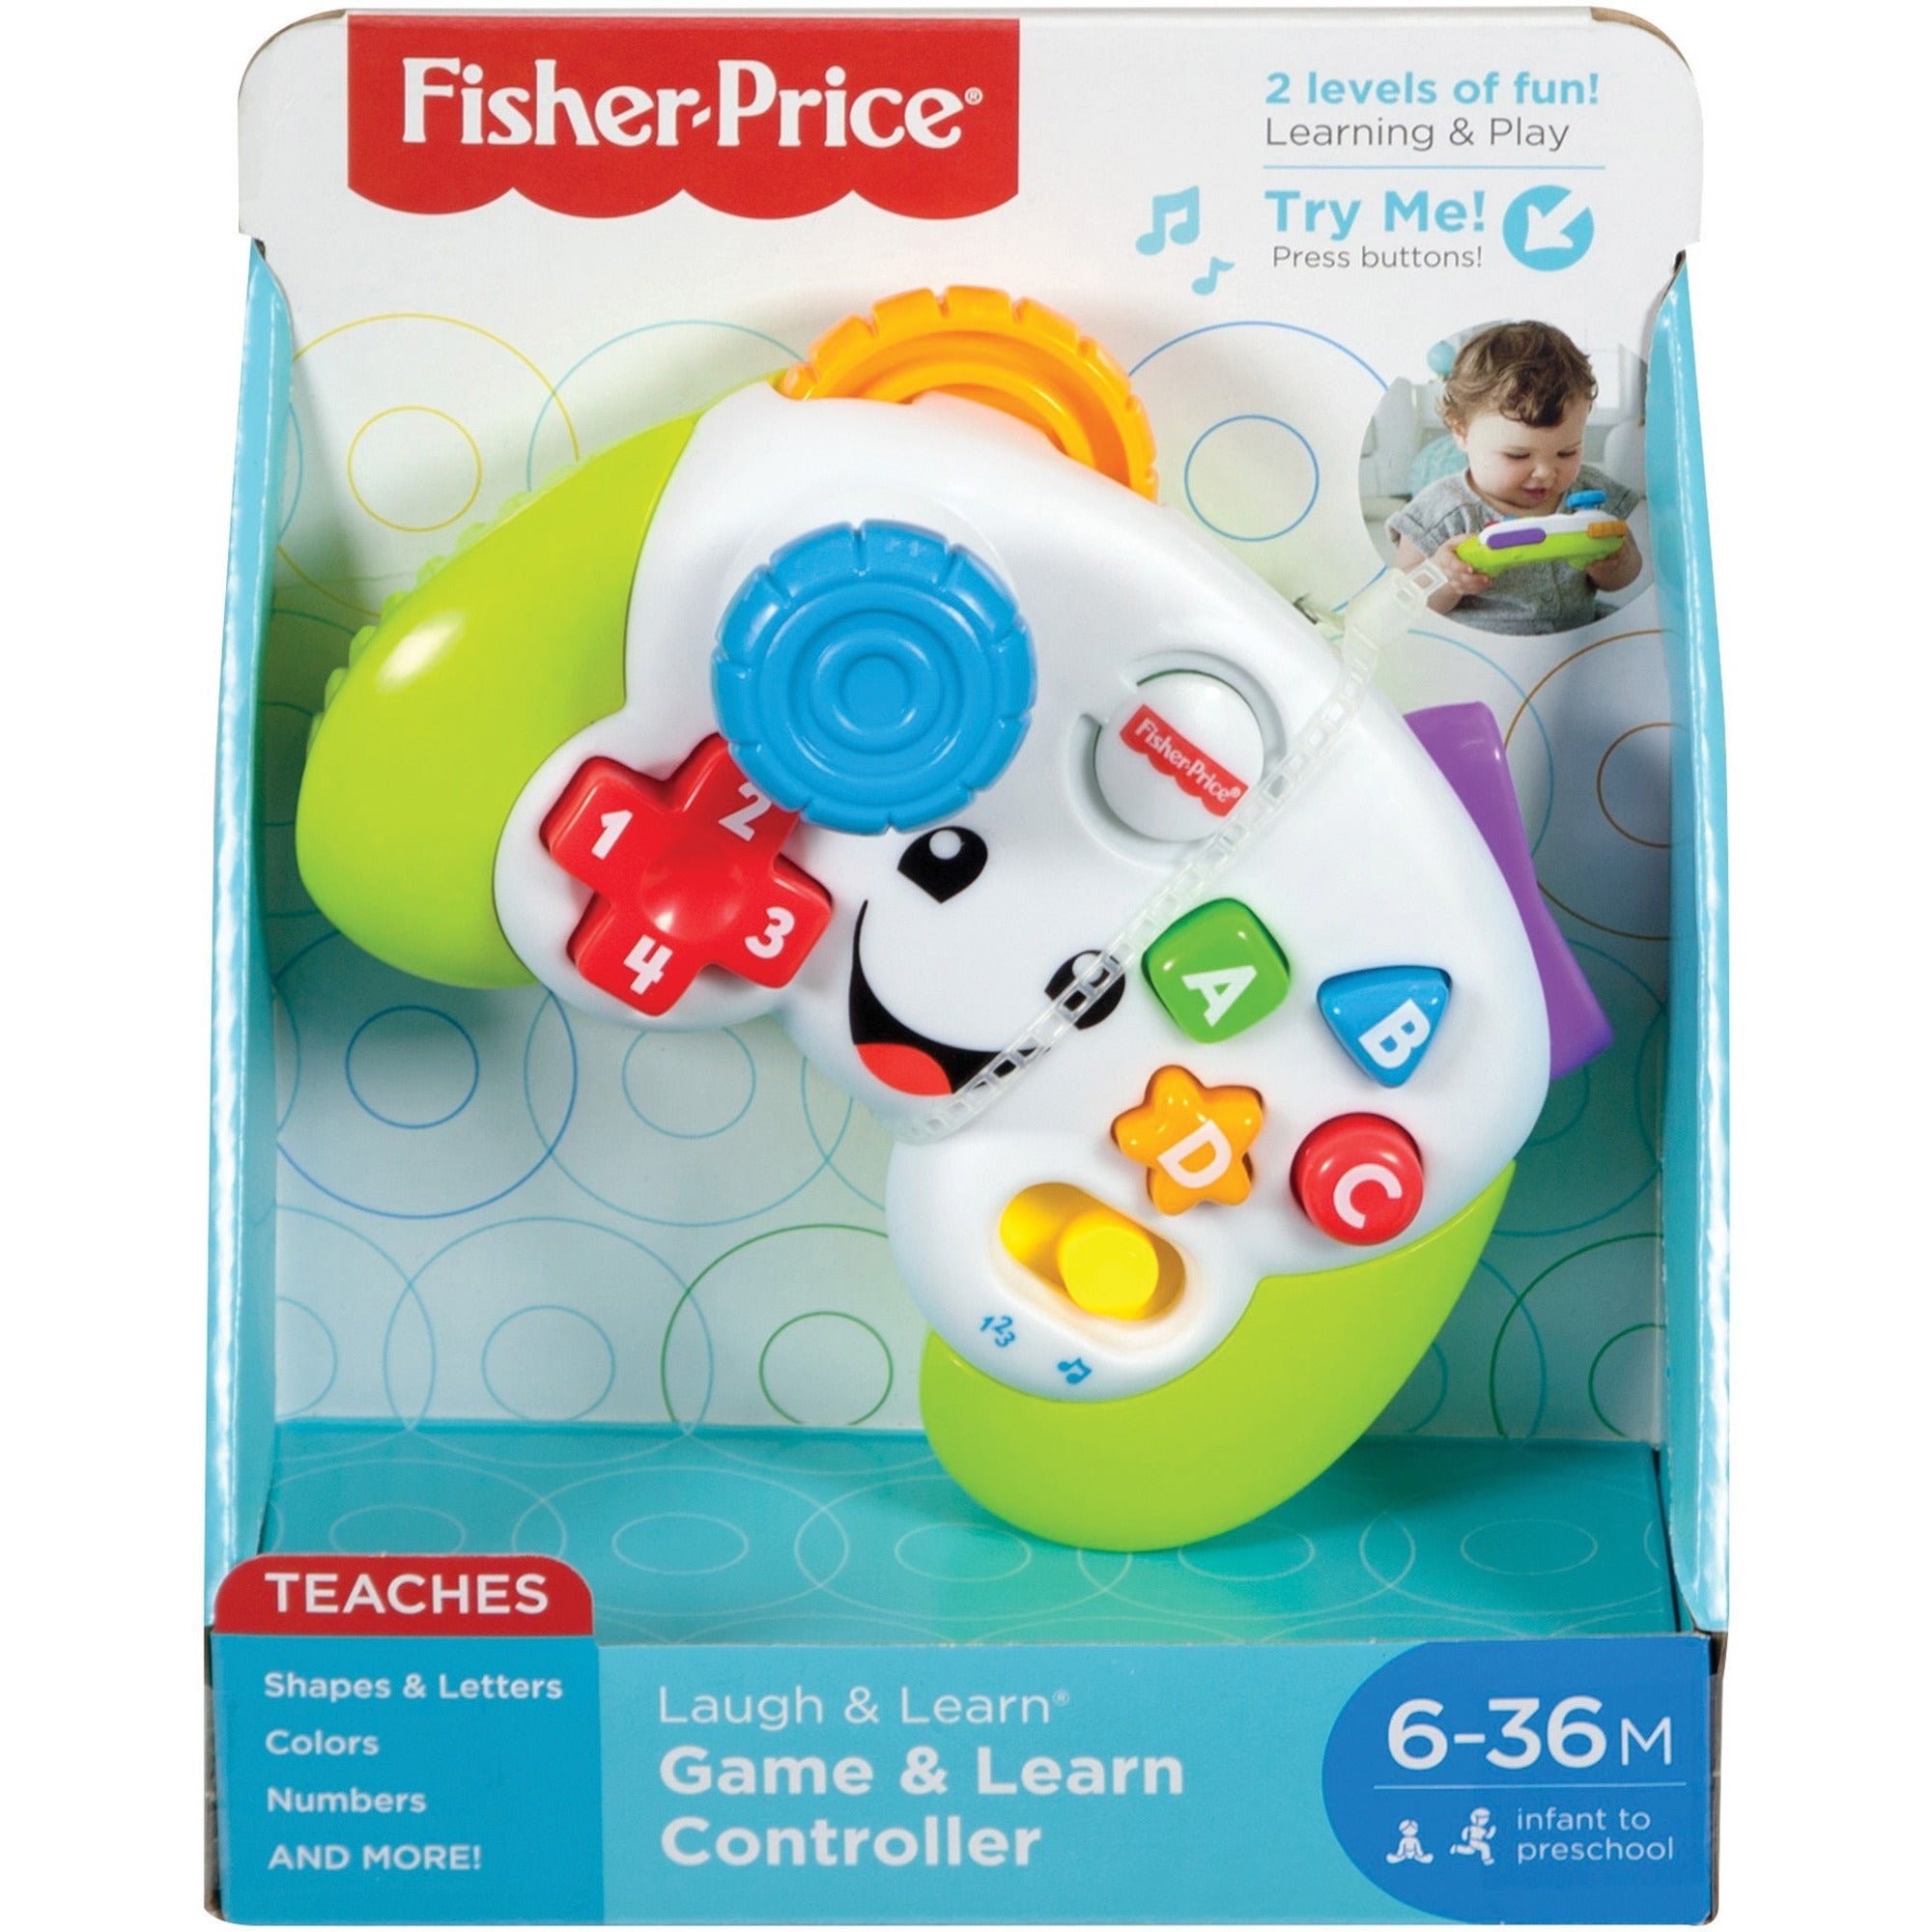 laugh-&-learn-game-&-learn-controller-skill-learning-number-color-shape-songs-phrase-sound-alphabet-fine-motor-letter-eye-hand-coordination-dexterity--6-month-3-year-multicolor_fipfnt06 - 1